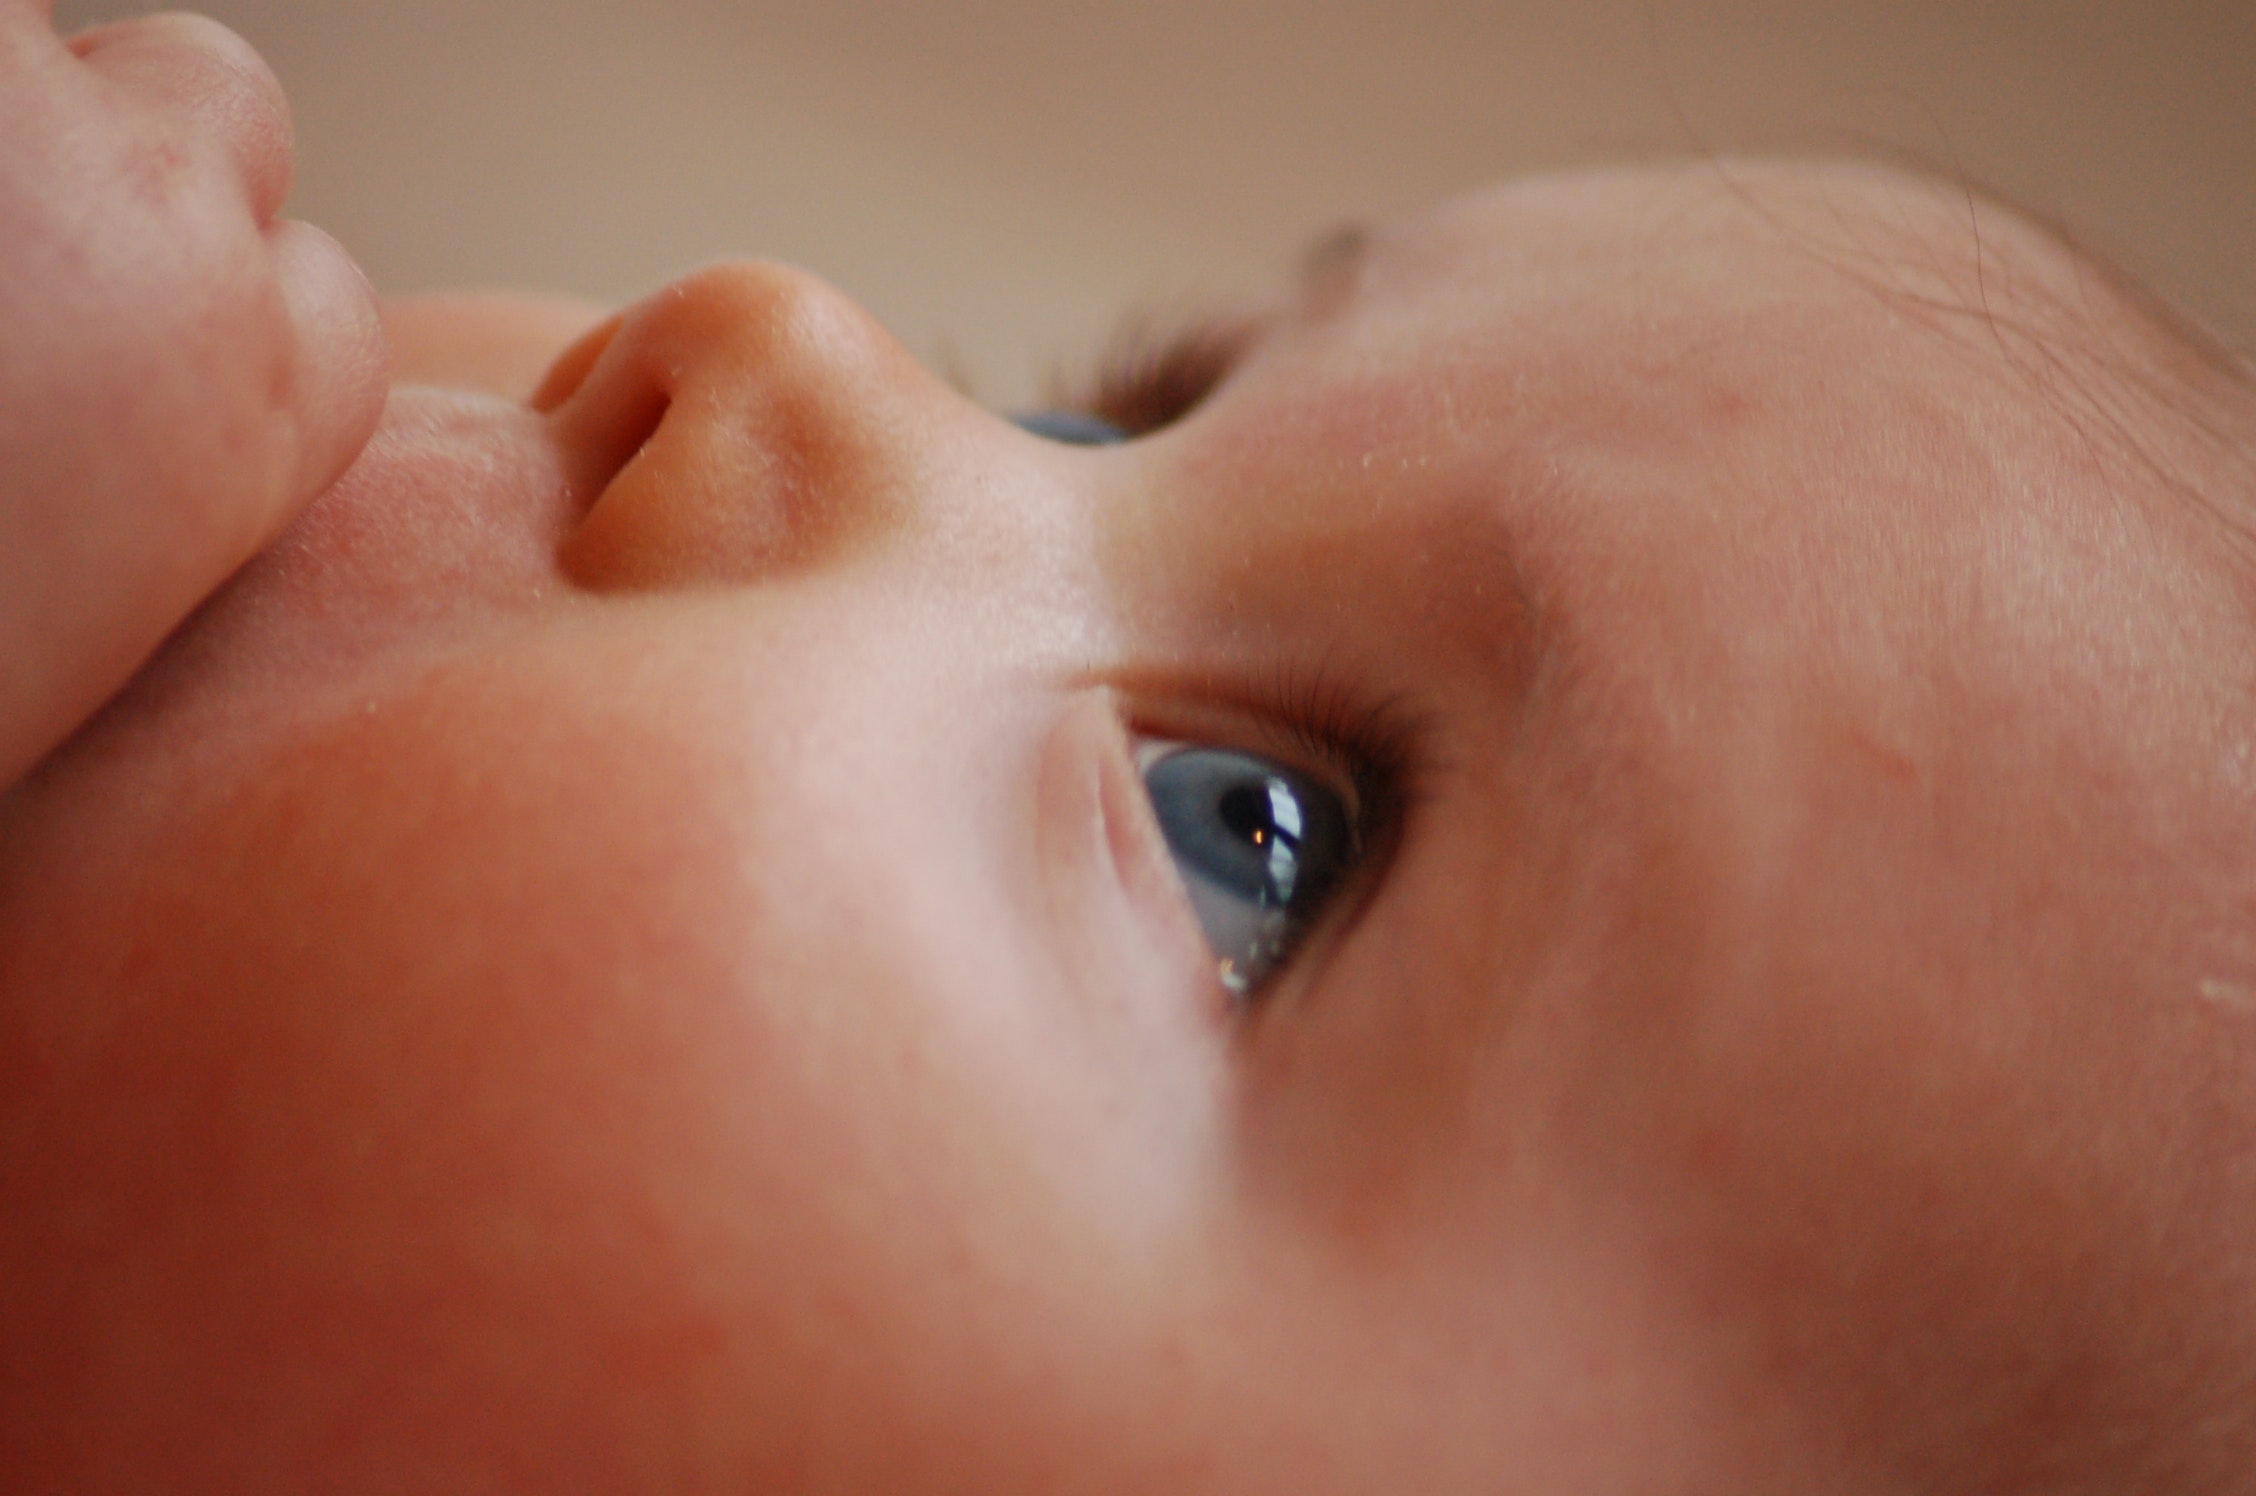 A close up photo of a baby's face